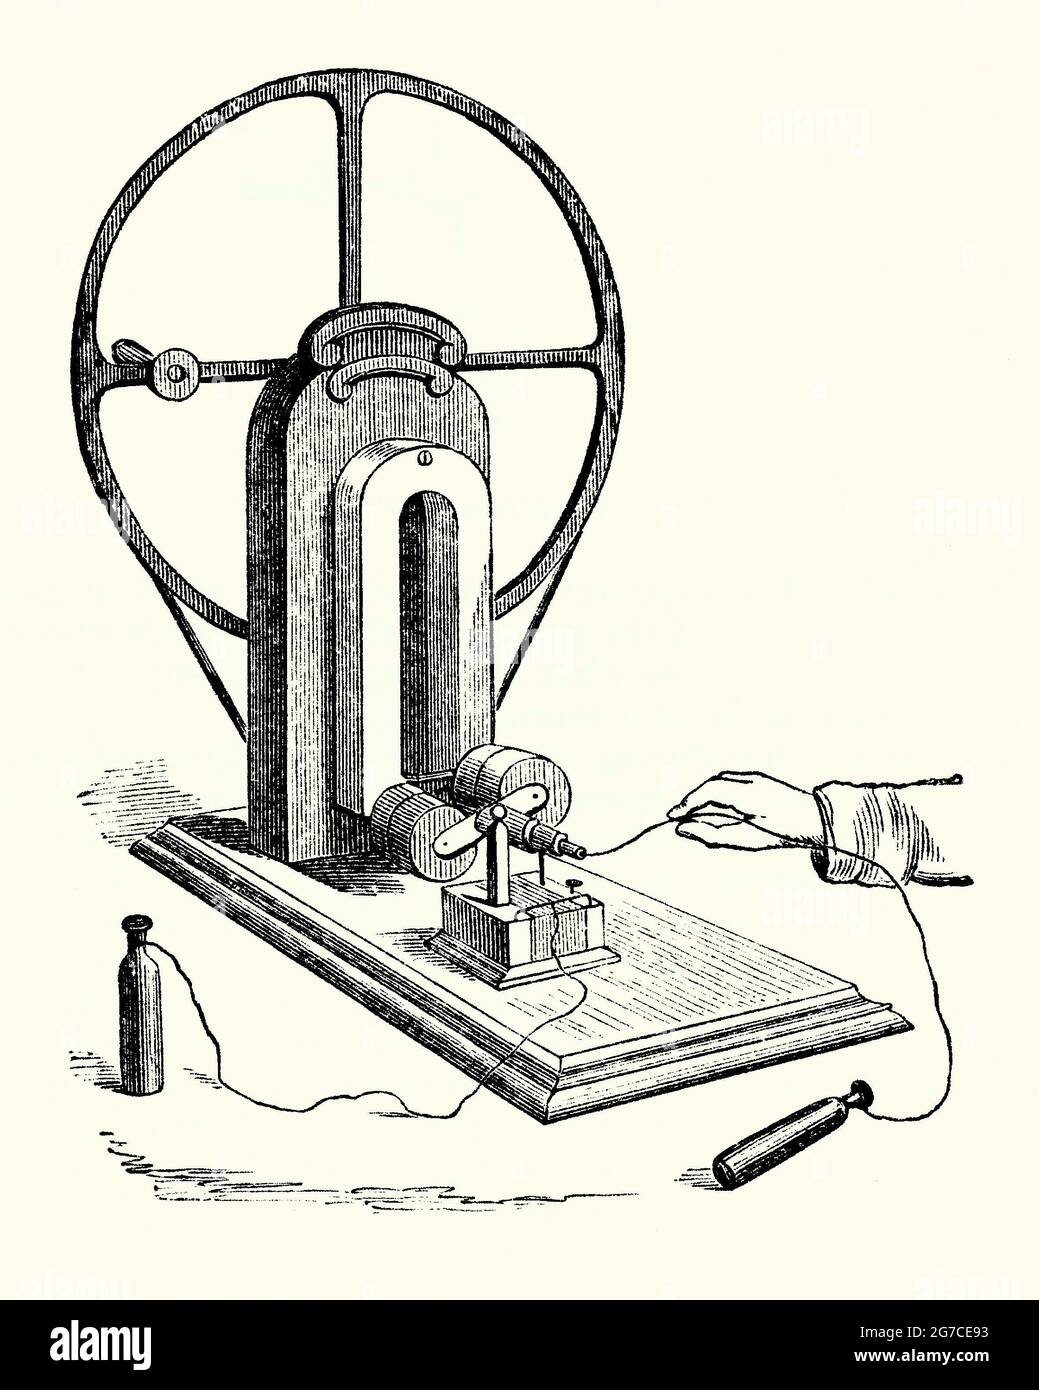 An old engraving showing Clarke’s magneto-electric machine. It is from a book of the 1890s on Victorian discoveries and inventions during the 1800s. A magneto is an electrical generator that uses magnets to produce alternating current. Here a powerful steel magnet is placed upright. When the rotating wheel (rear) is turned, two (induced) coils (centre) are rotated. The voltages induced in the coils generate currents. This small electric shock can be felt by someone picking up the two brass handles (foreground) – an early form of electrotherapy. It was invented by Edward Clarke in the 1830s. Stock Photo